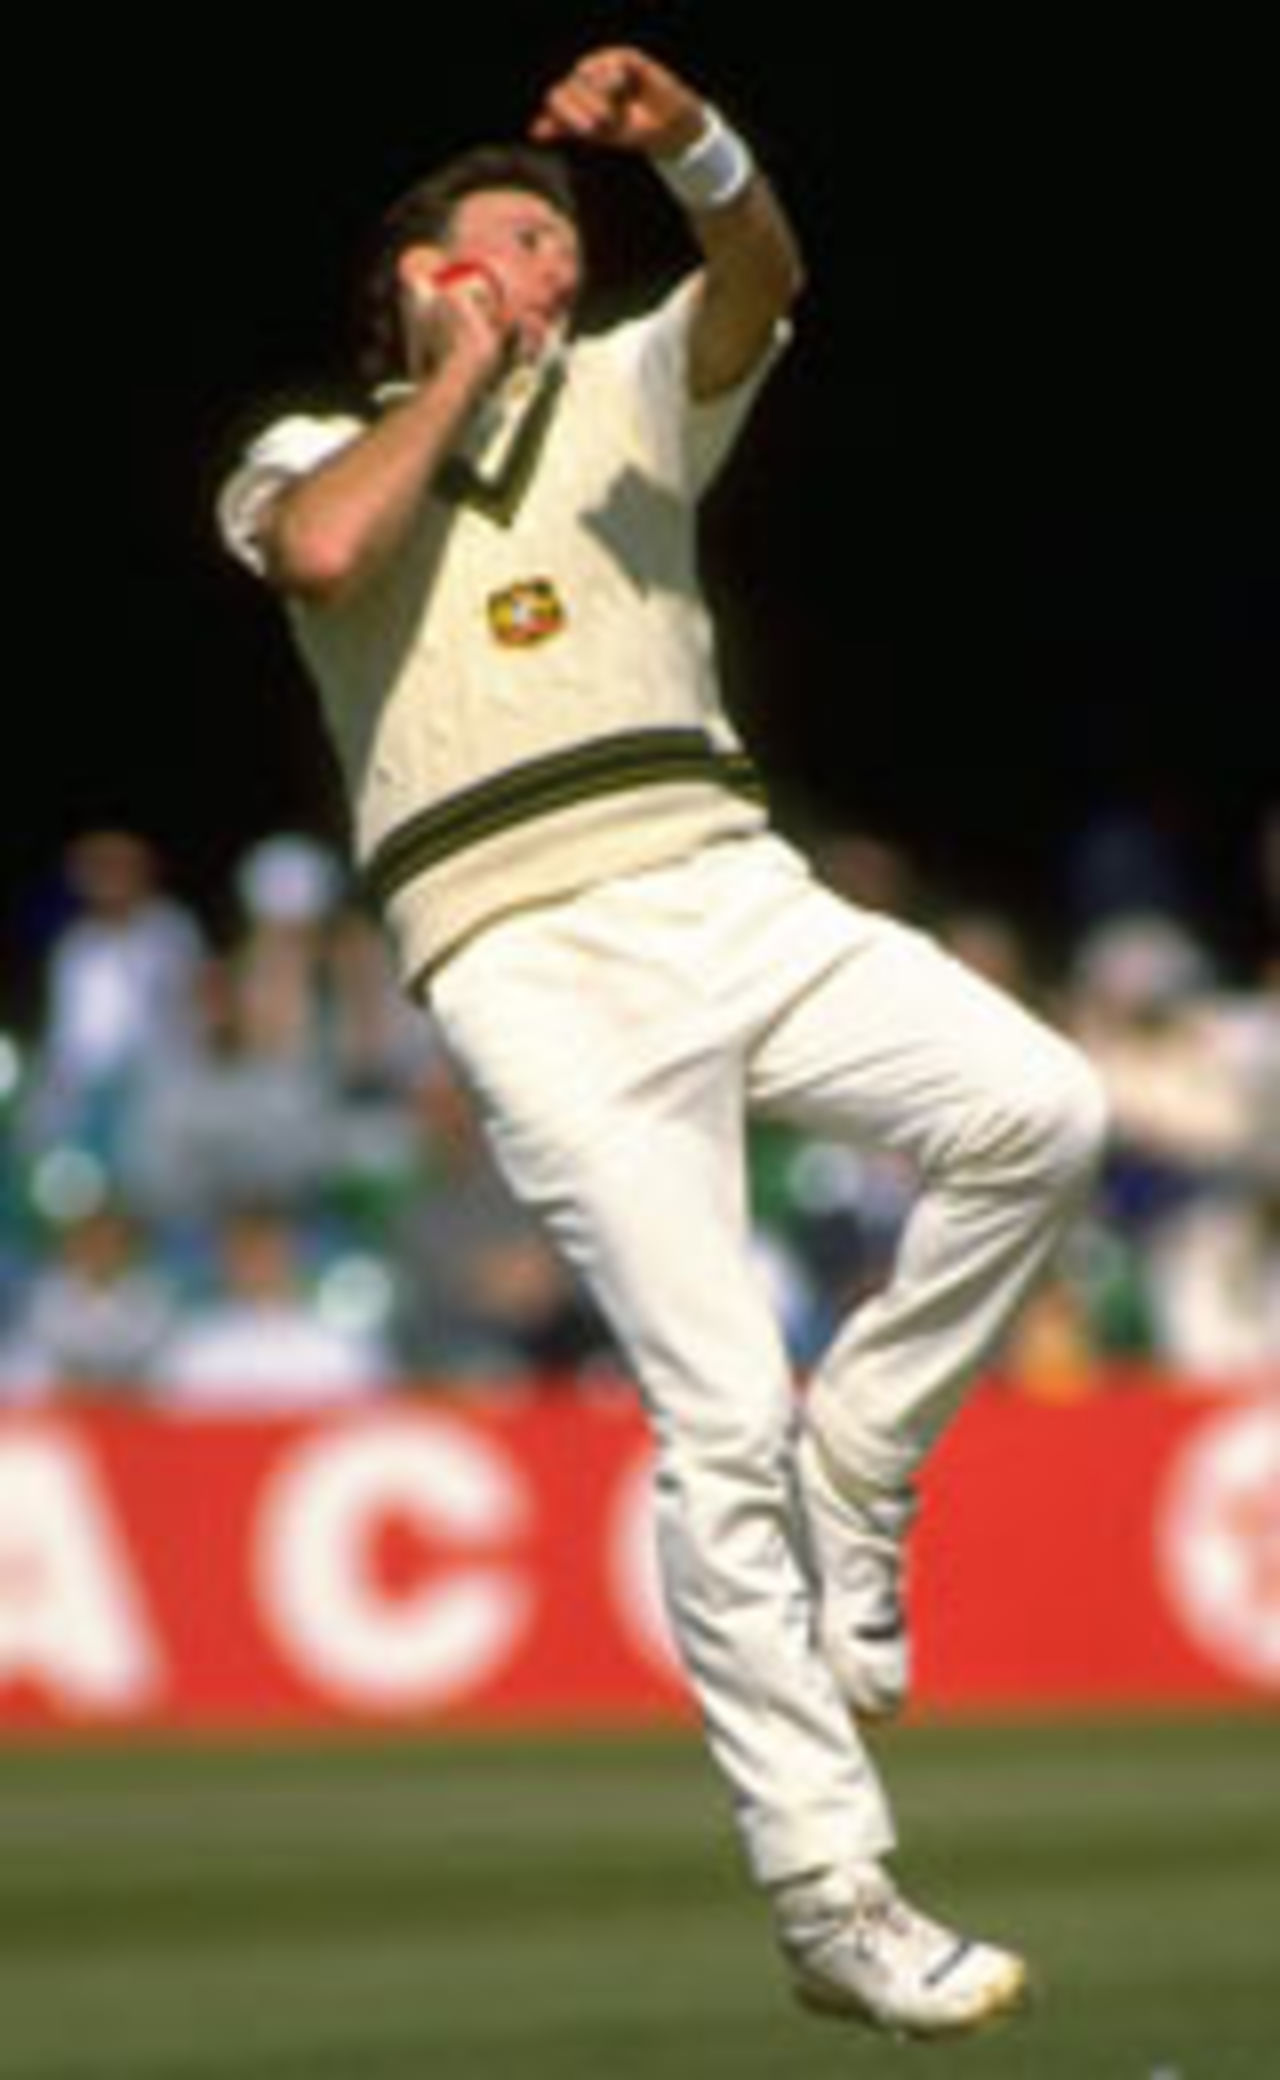 Geoff Lawson in delivery stride in a tour match, Worcestershire v Australians, May 1, 1989